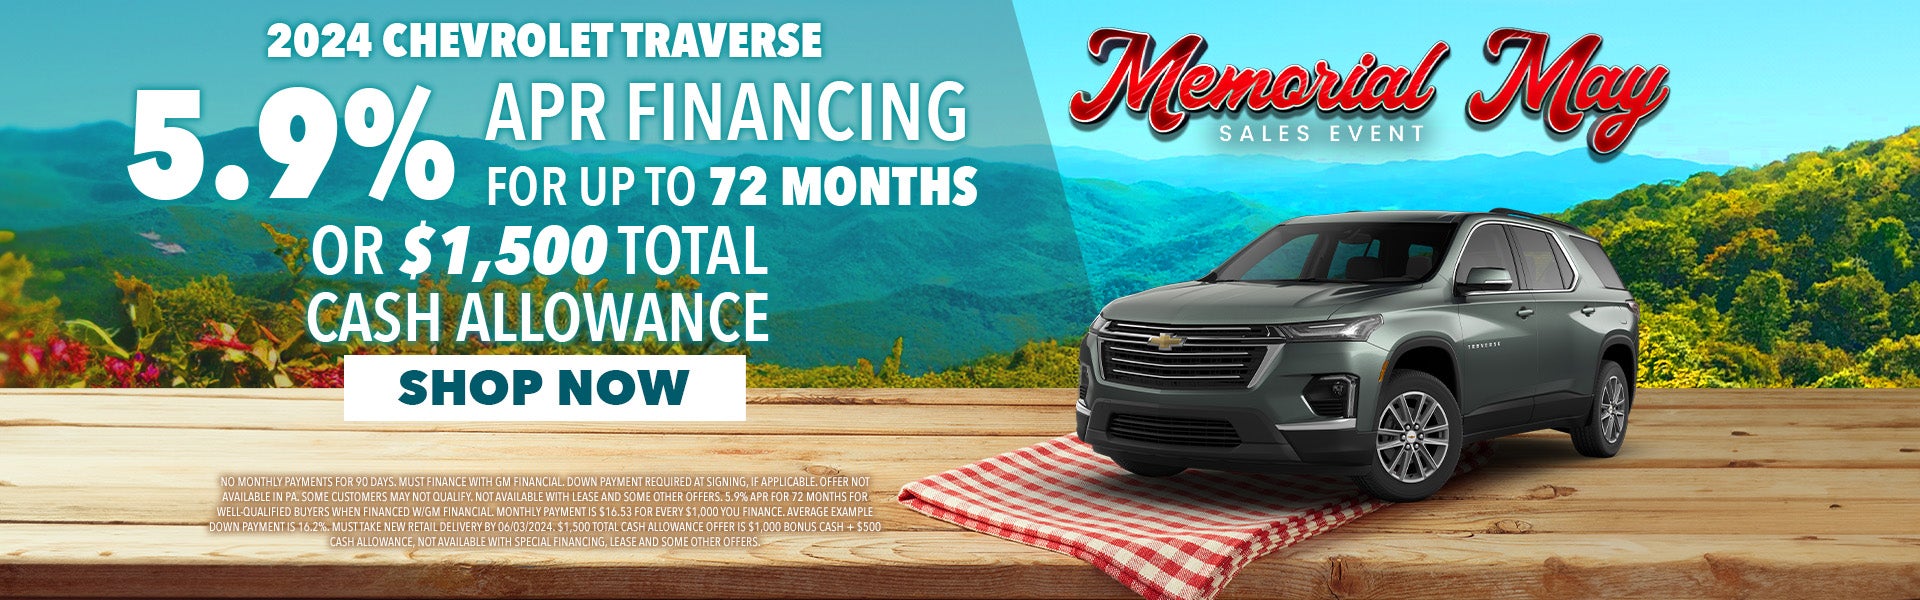 5.9% for 72 months or $1,500 bonus cash on 24 Chevy Traverse